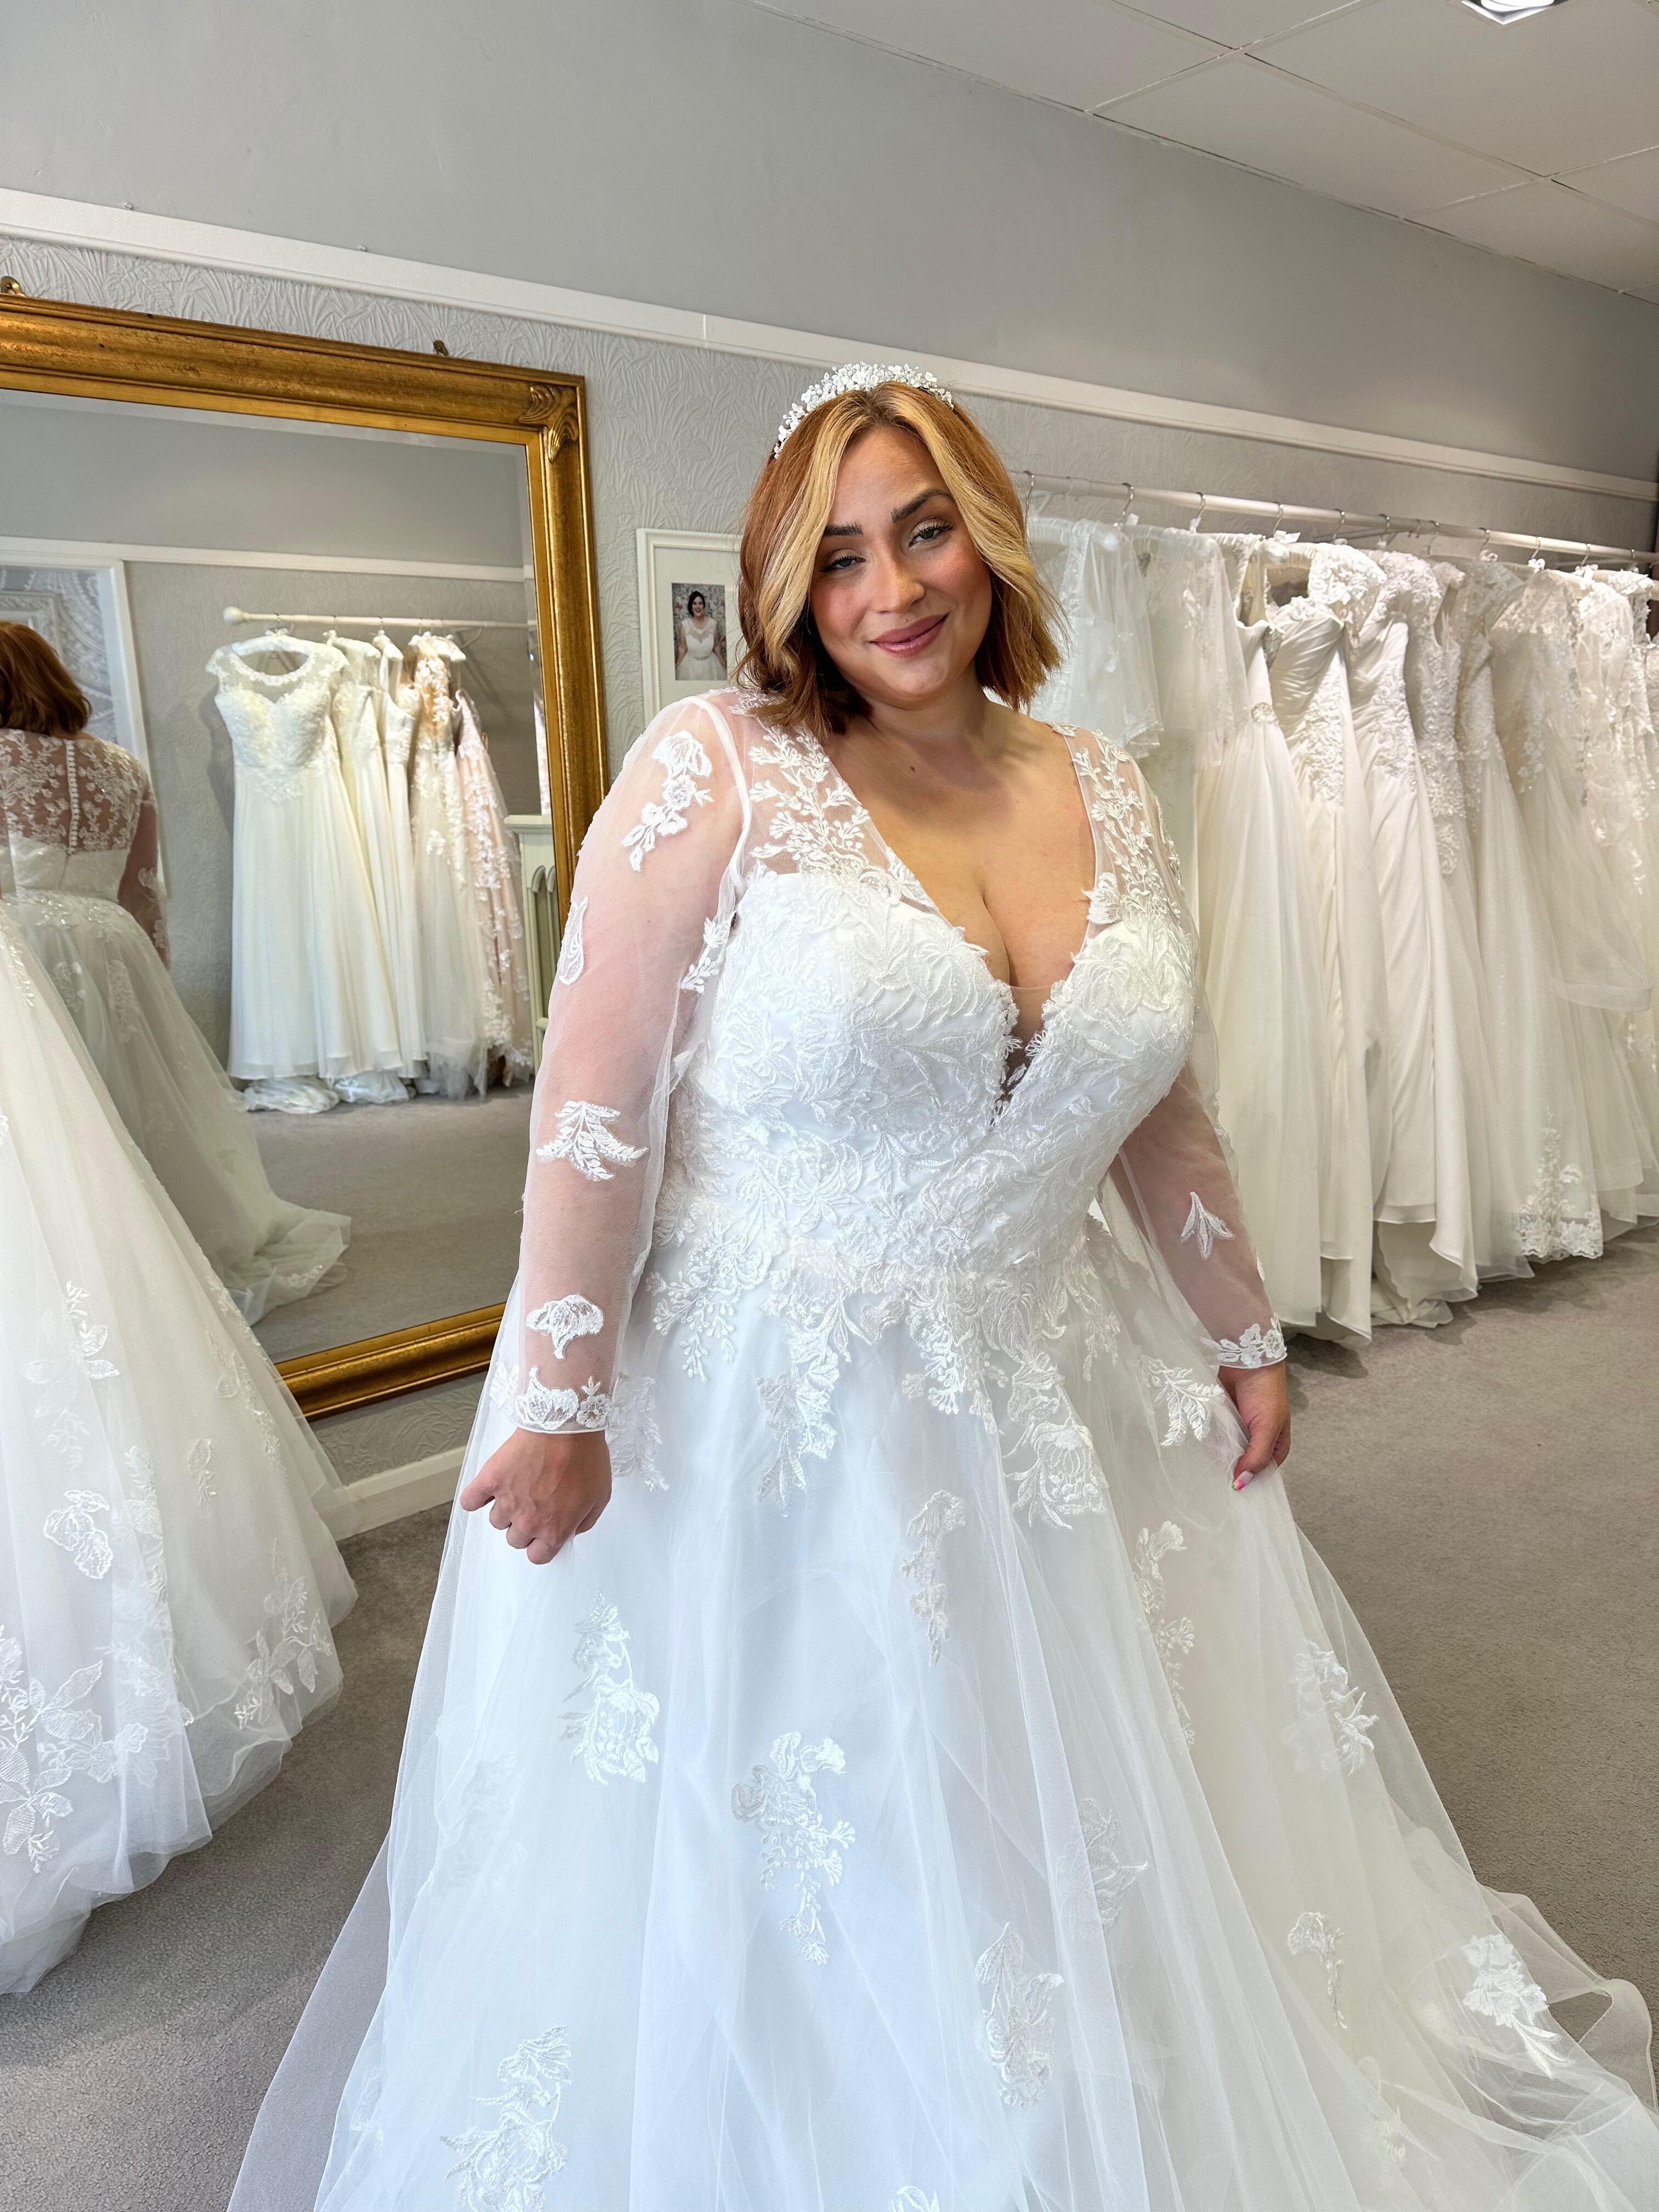 Blouse Styles For Curvy Brides!